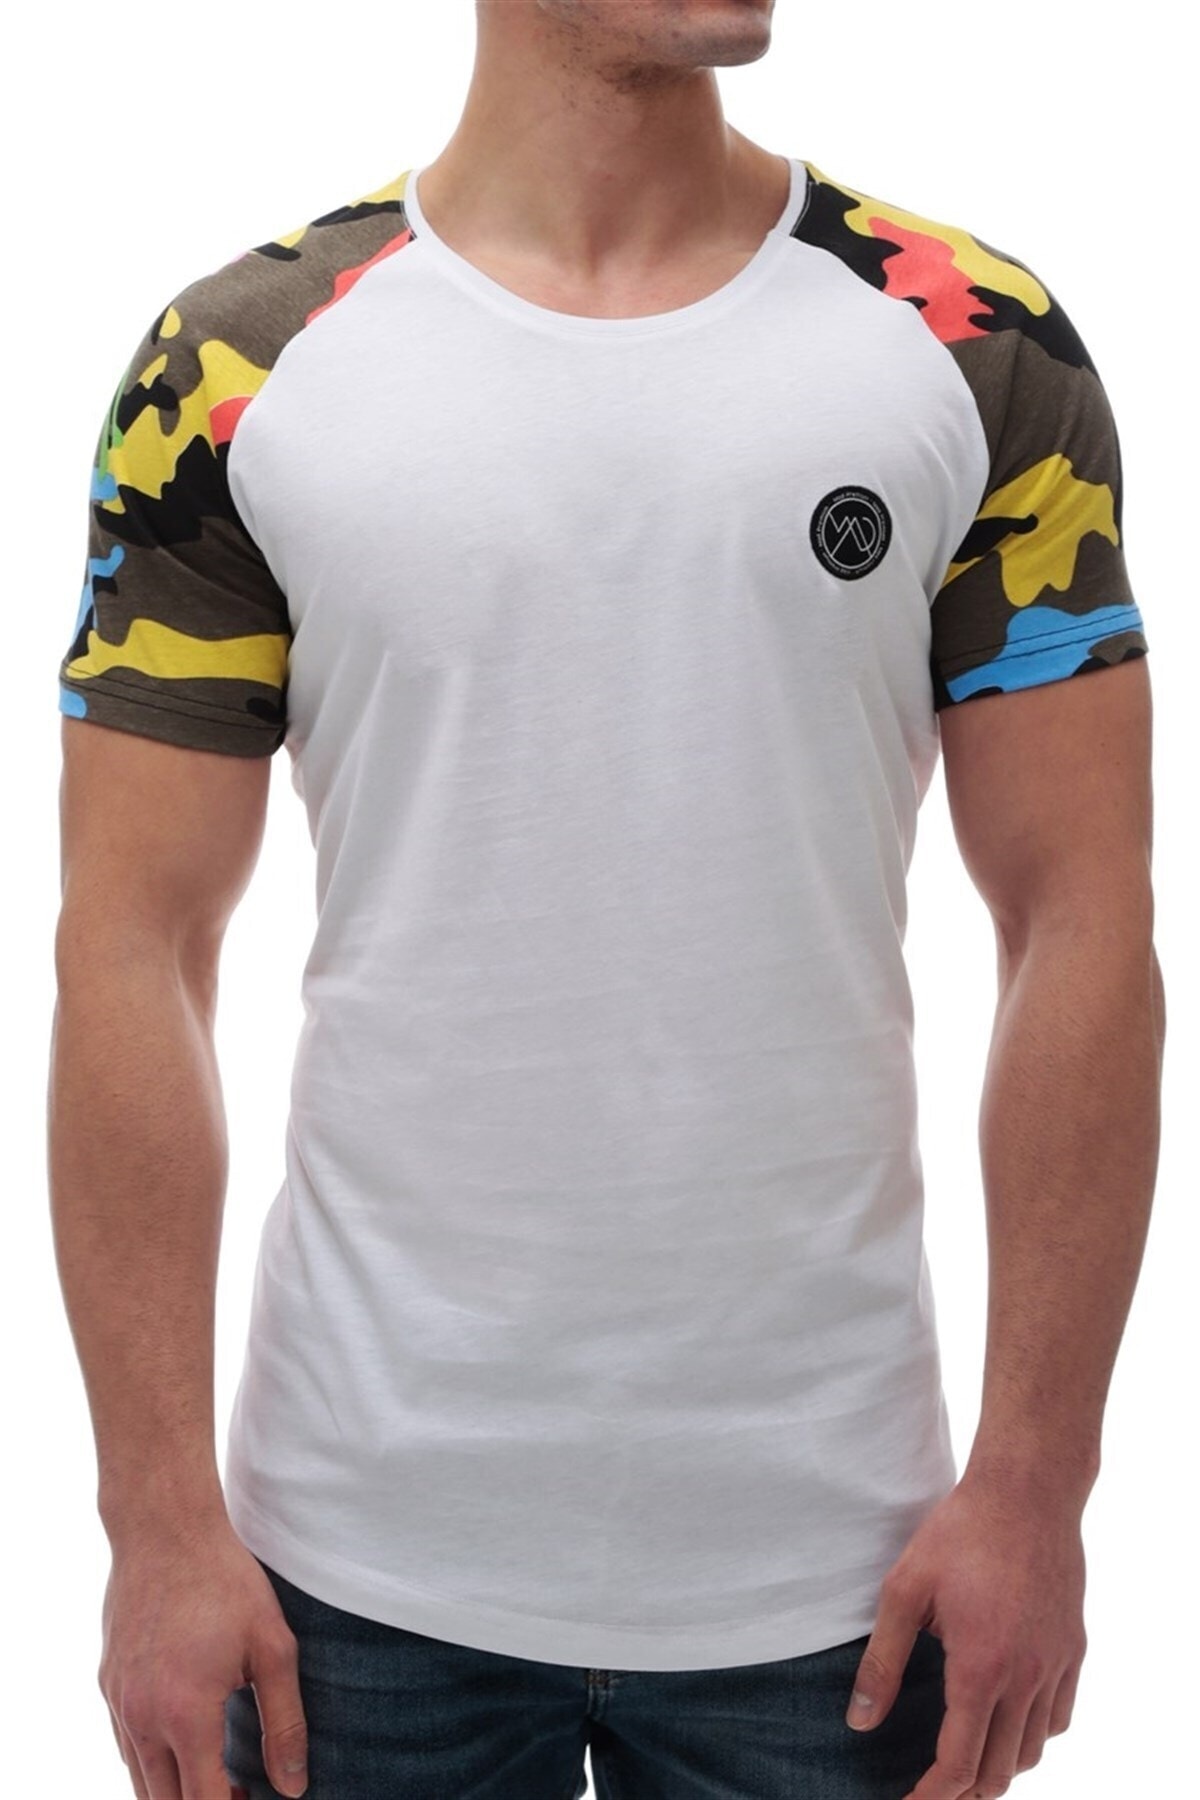 Madmext Camouflage Patterned White T-Shirt 2979